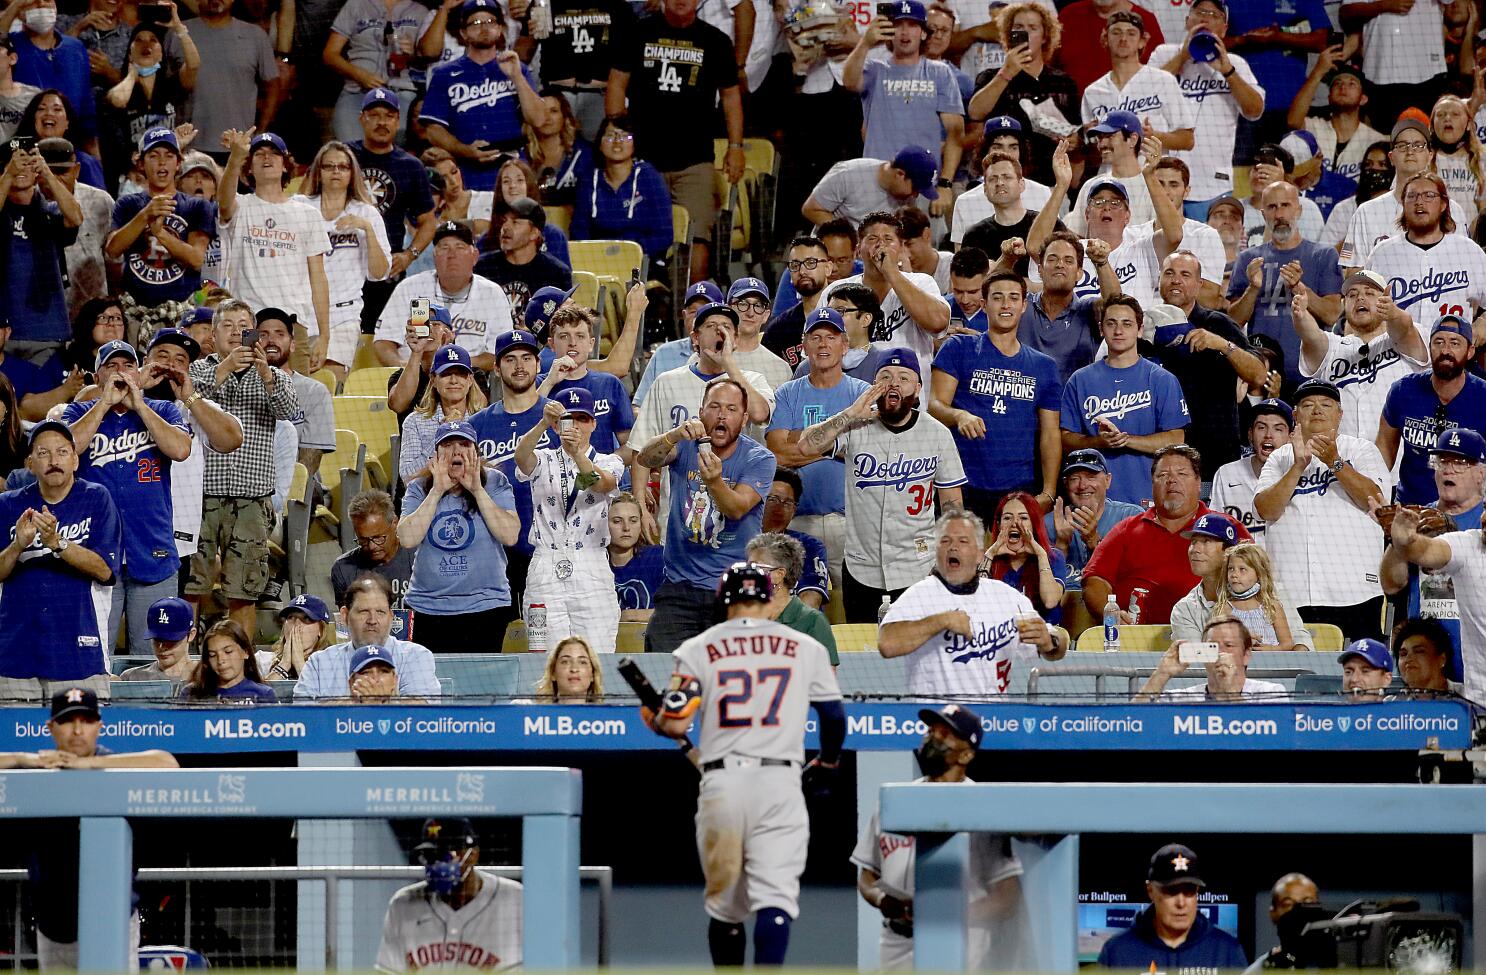 Astros Cheating Allegations Drudge Up Dodgers' World Series Woes